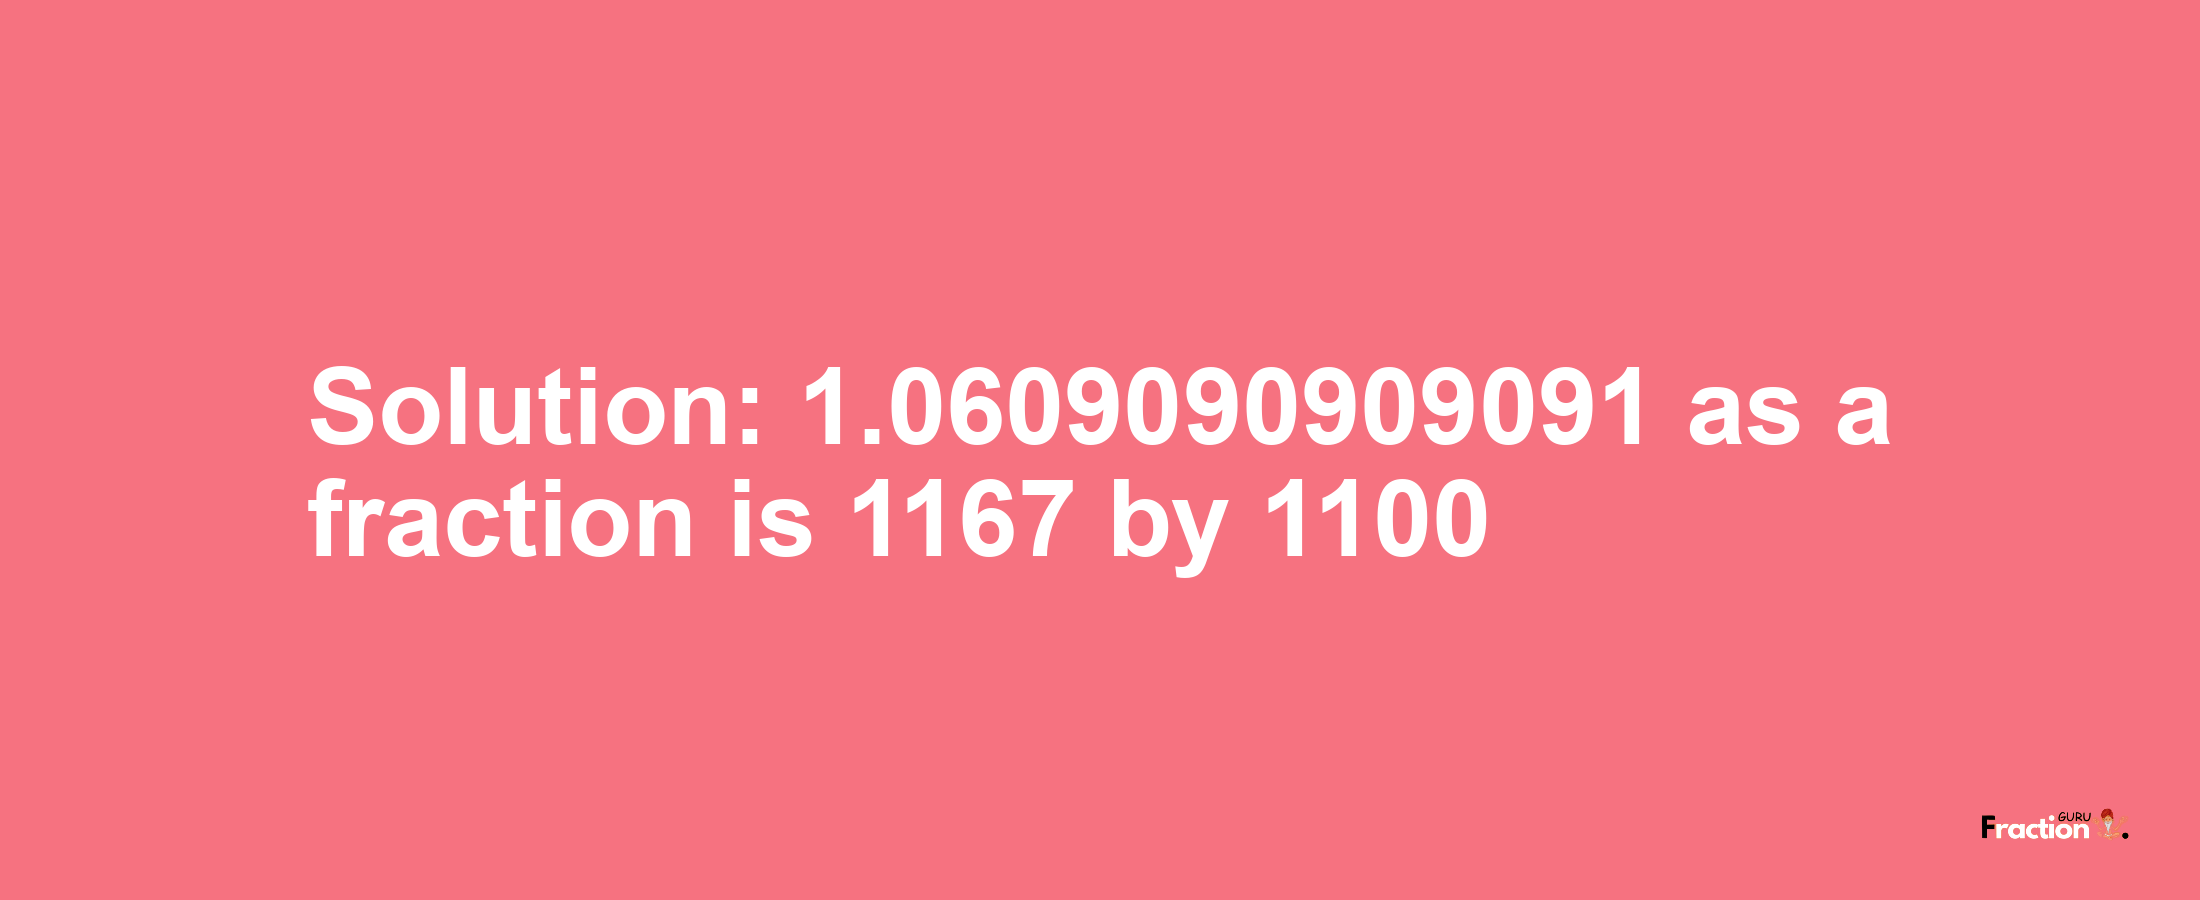 Solution:1.0609090909091 as a fraction is 1167/1100